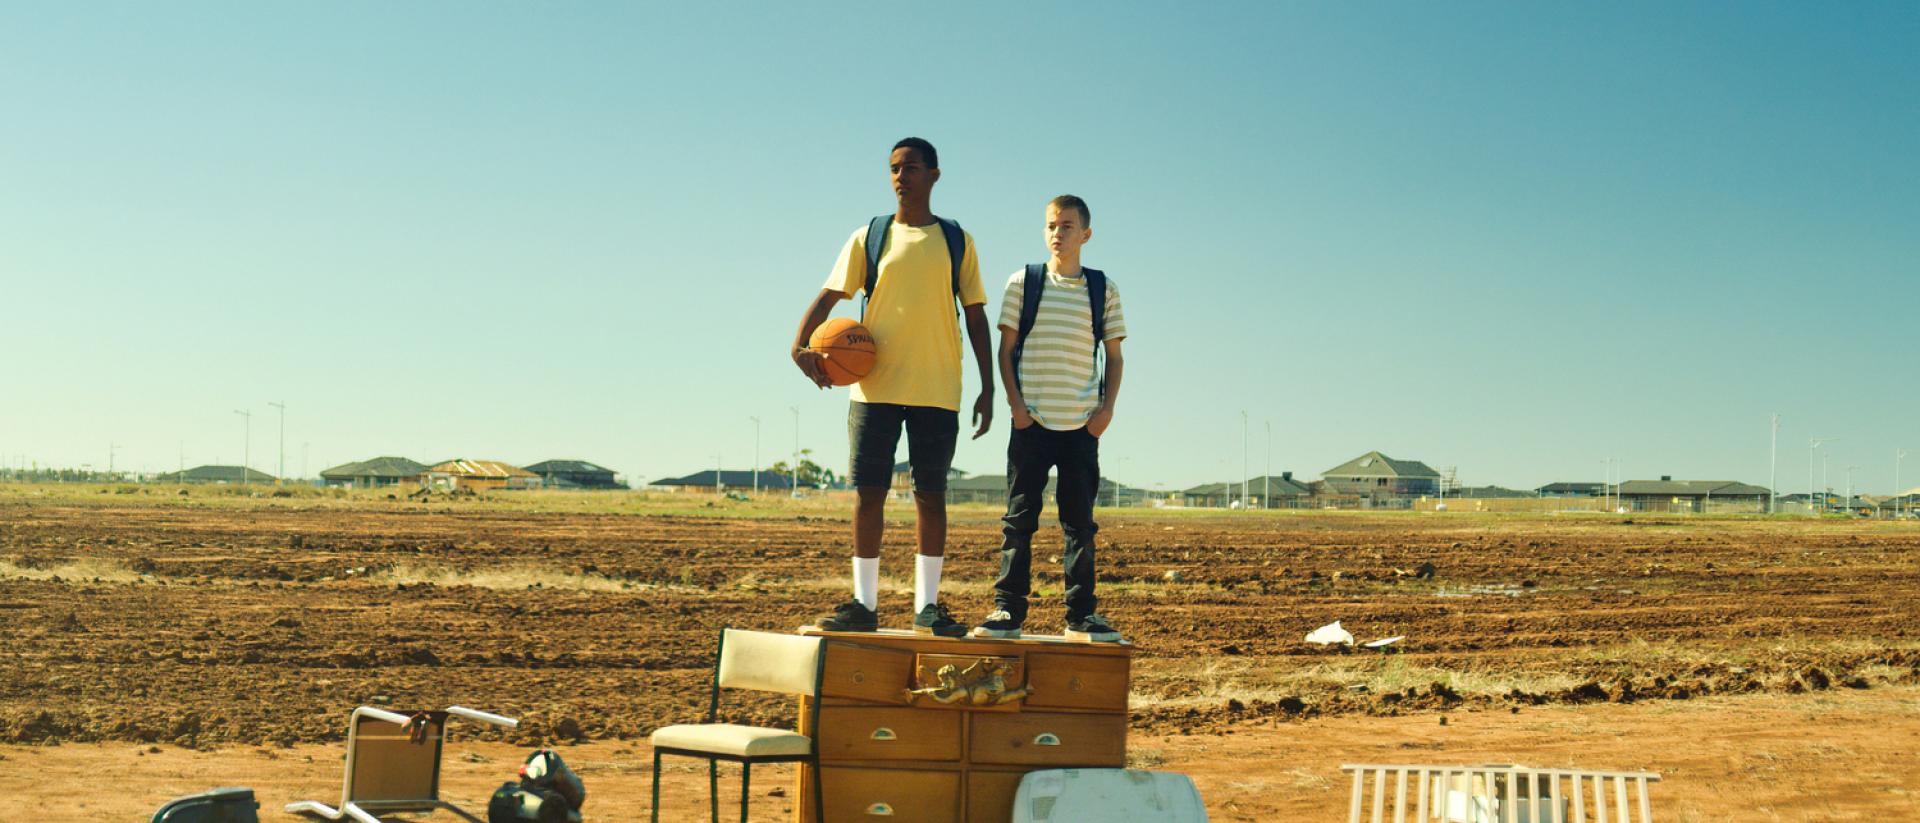 two teenagers stand on an old chest of drawers in an empty field.